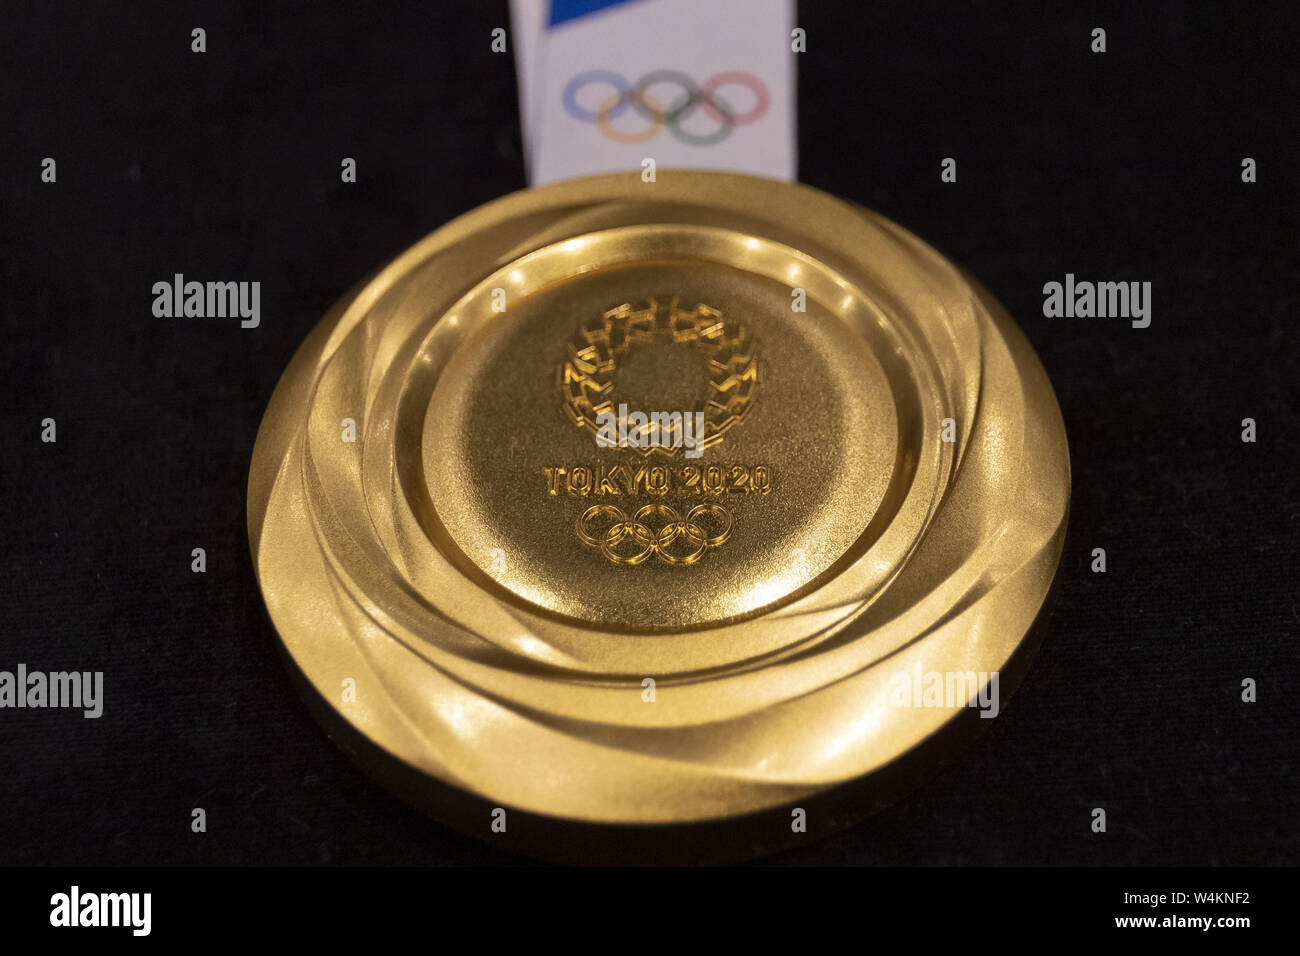 Tokyo Japan 24th July 2019 The Design For The Tokyo 2020 Olympic Gold Medal On Display During The One Year To Go Ceremony Organizers Unveiled The Designs For The Tokyo 2020 Medals